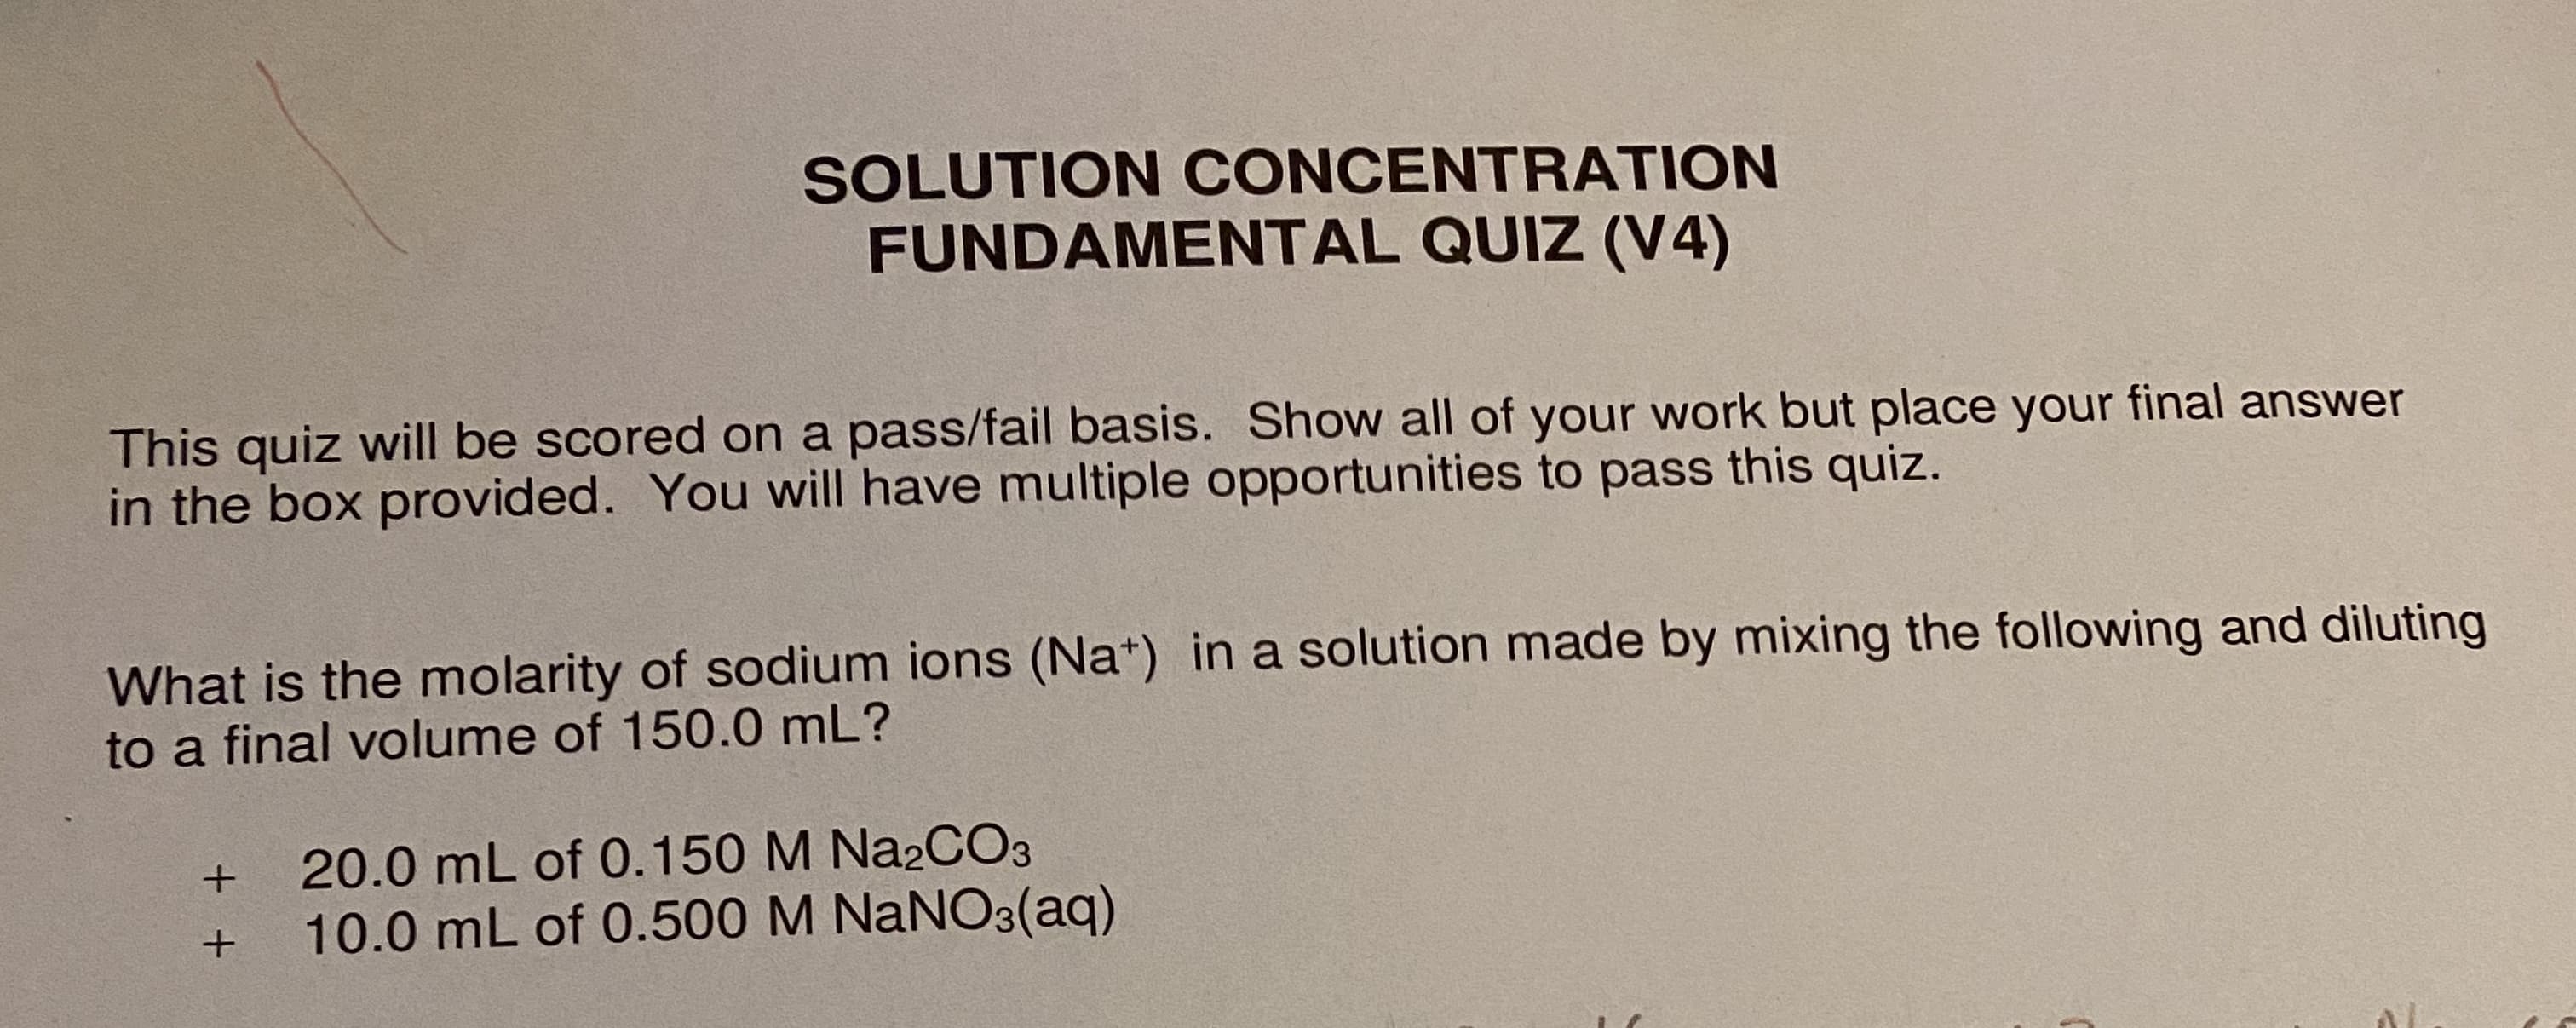 SOLUTION CONCENTRATION
FUNDAMENTAL QUIZ (V4)
This quiz will be scored on a pass/fail basis. Show all of your work but place your final answer
in the box provided. You will have multiple opportunities to pass this quiz.
What is the molarity of sodium ions (Na*) in a solution made by mixing the following and diluting
to a final volume of 150.0 mL?
20.0 mL of 0.150 M Na2CO3
10.0 mL of 0.500 M NaNO3(aq)
